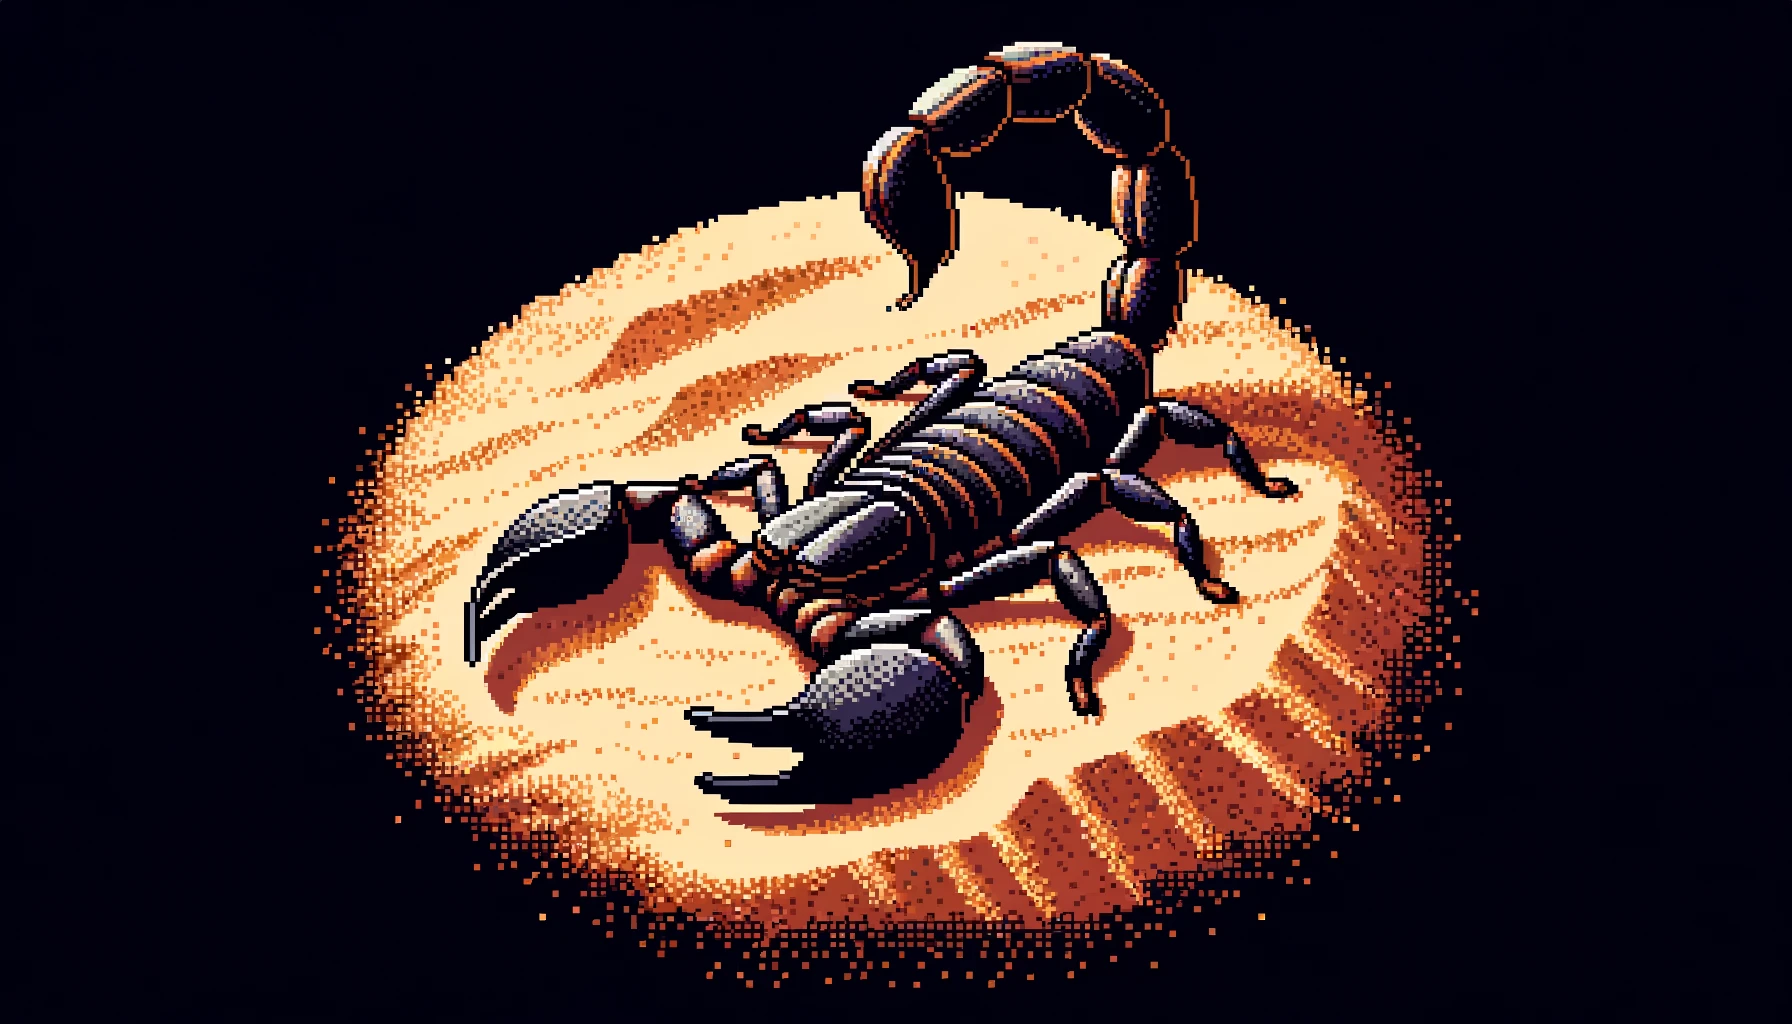 A scorpion resting on dry earth.